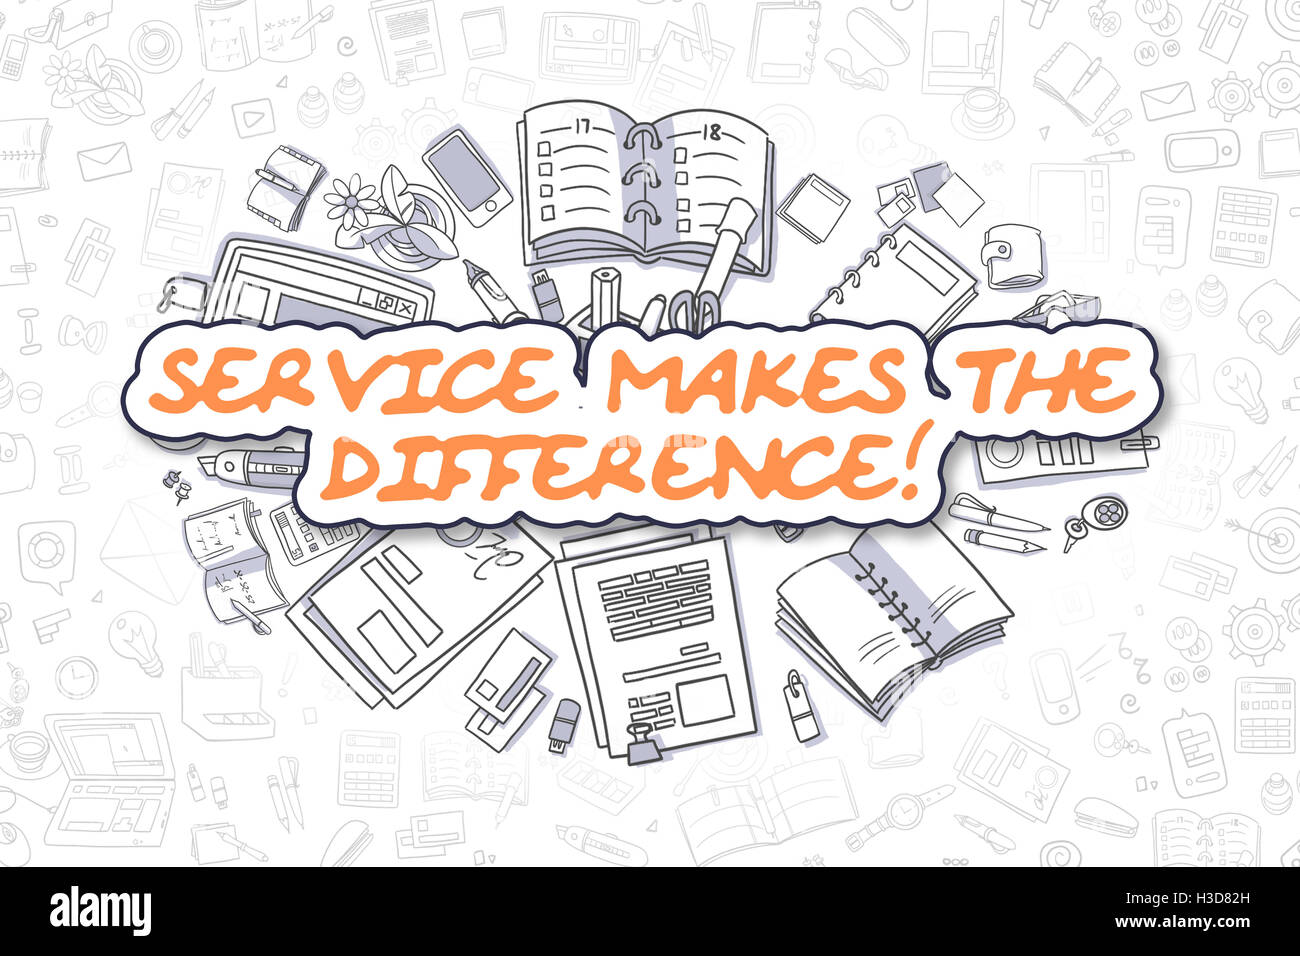 Service Makes The Difference - Business Concept. Stock Photo